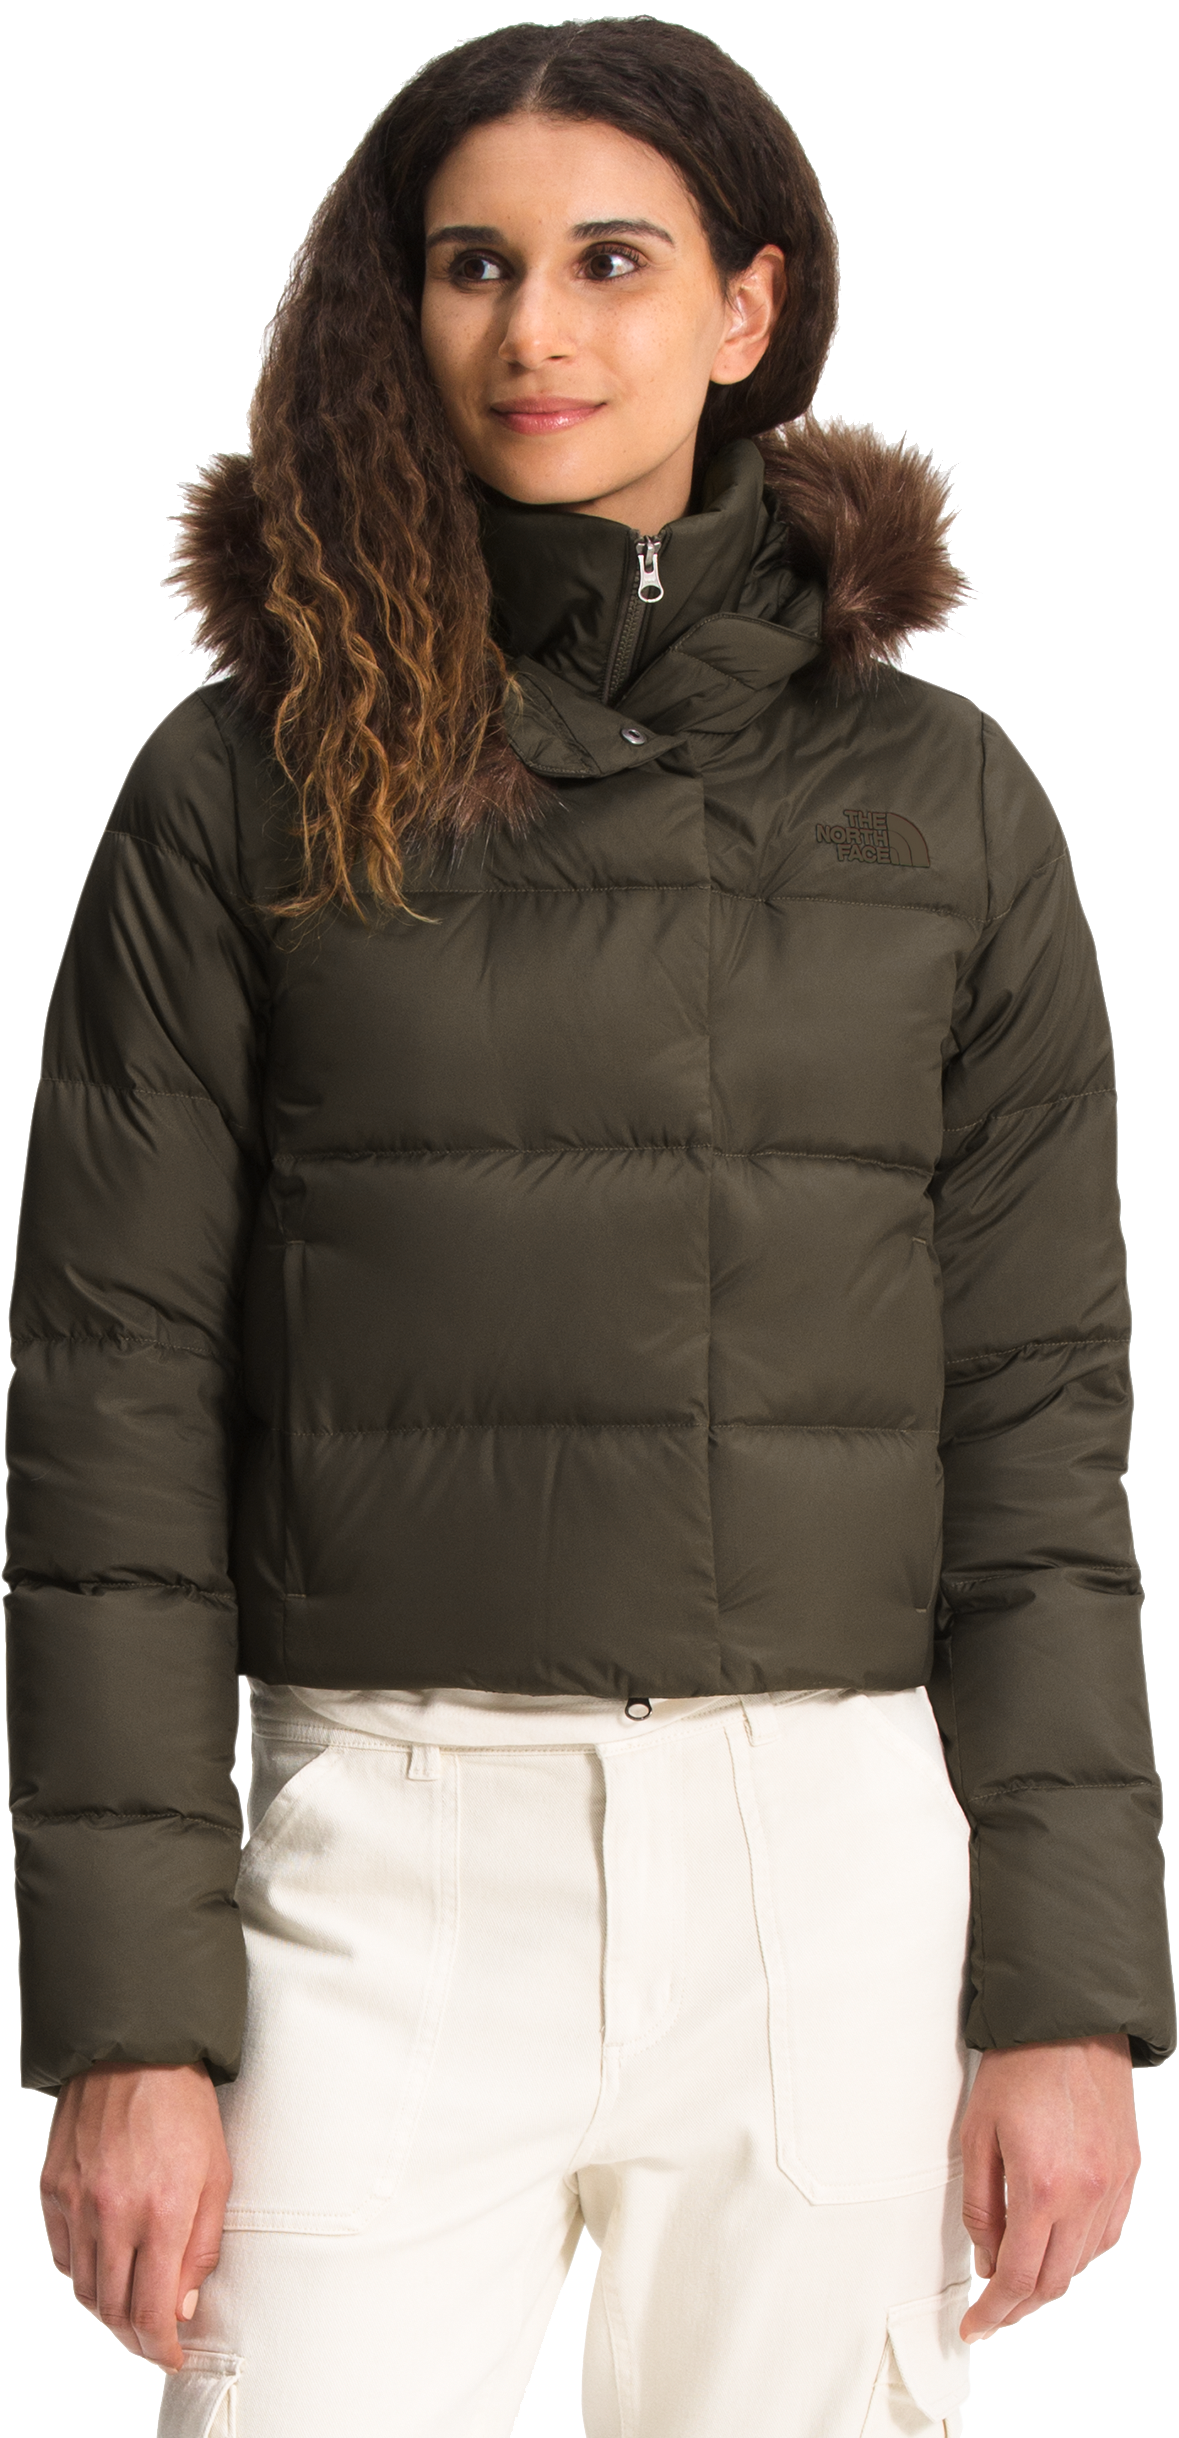 The North Face New Dealio Down Short Jacket for Ladies - New Taupe Green - L